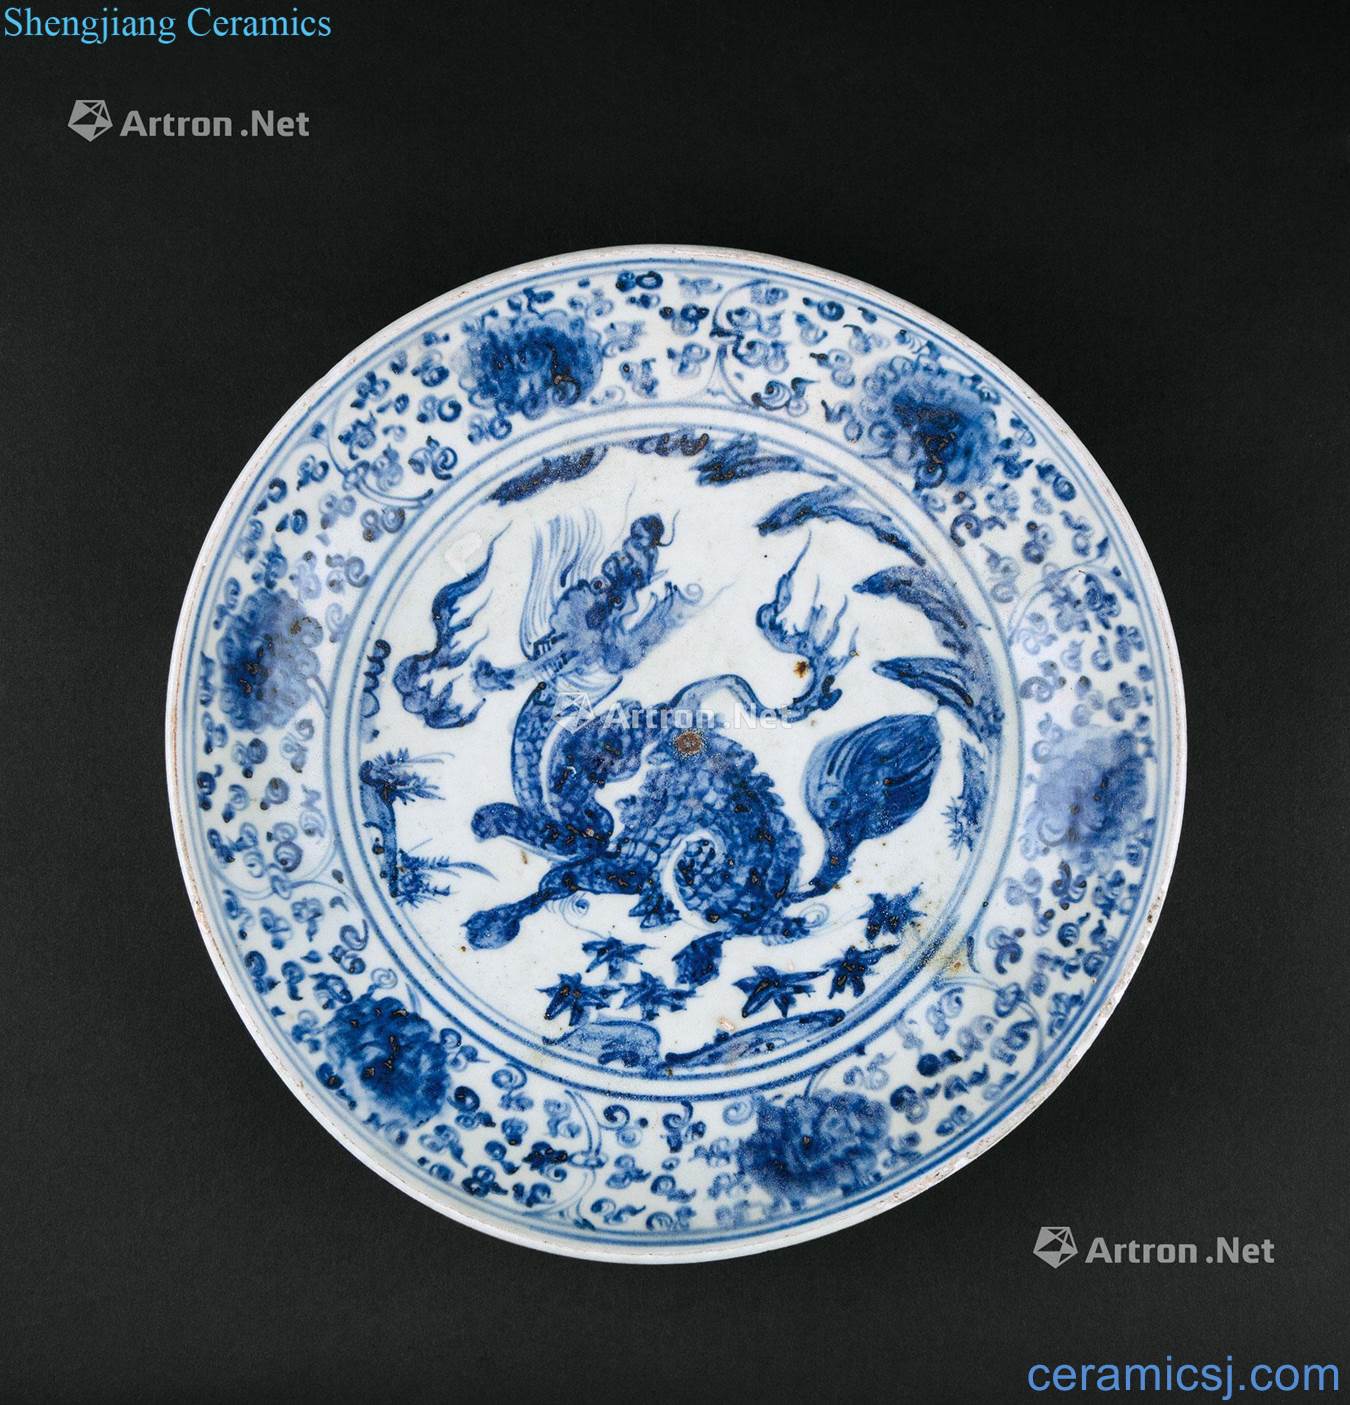 In the Ming dynasty (1368-1644) blue and white unicorn tray